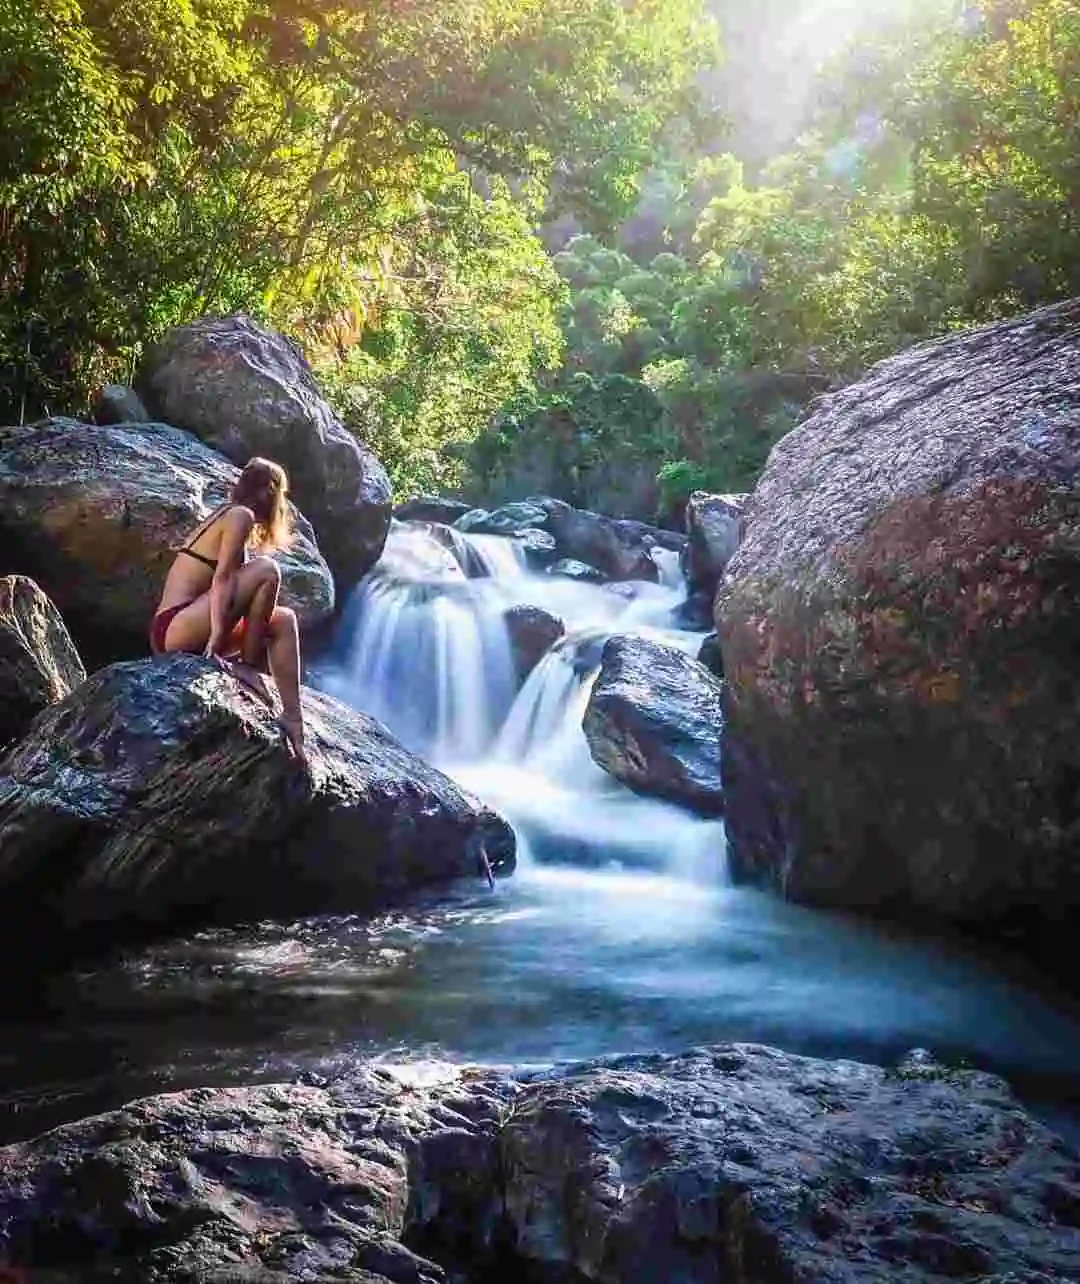 A woman sits in a swimsuit on a large rock looking at a waterfall as it cascades down the rocks